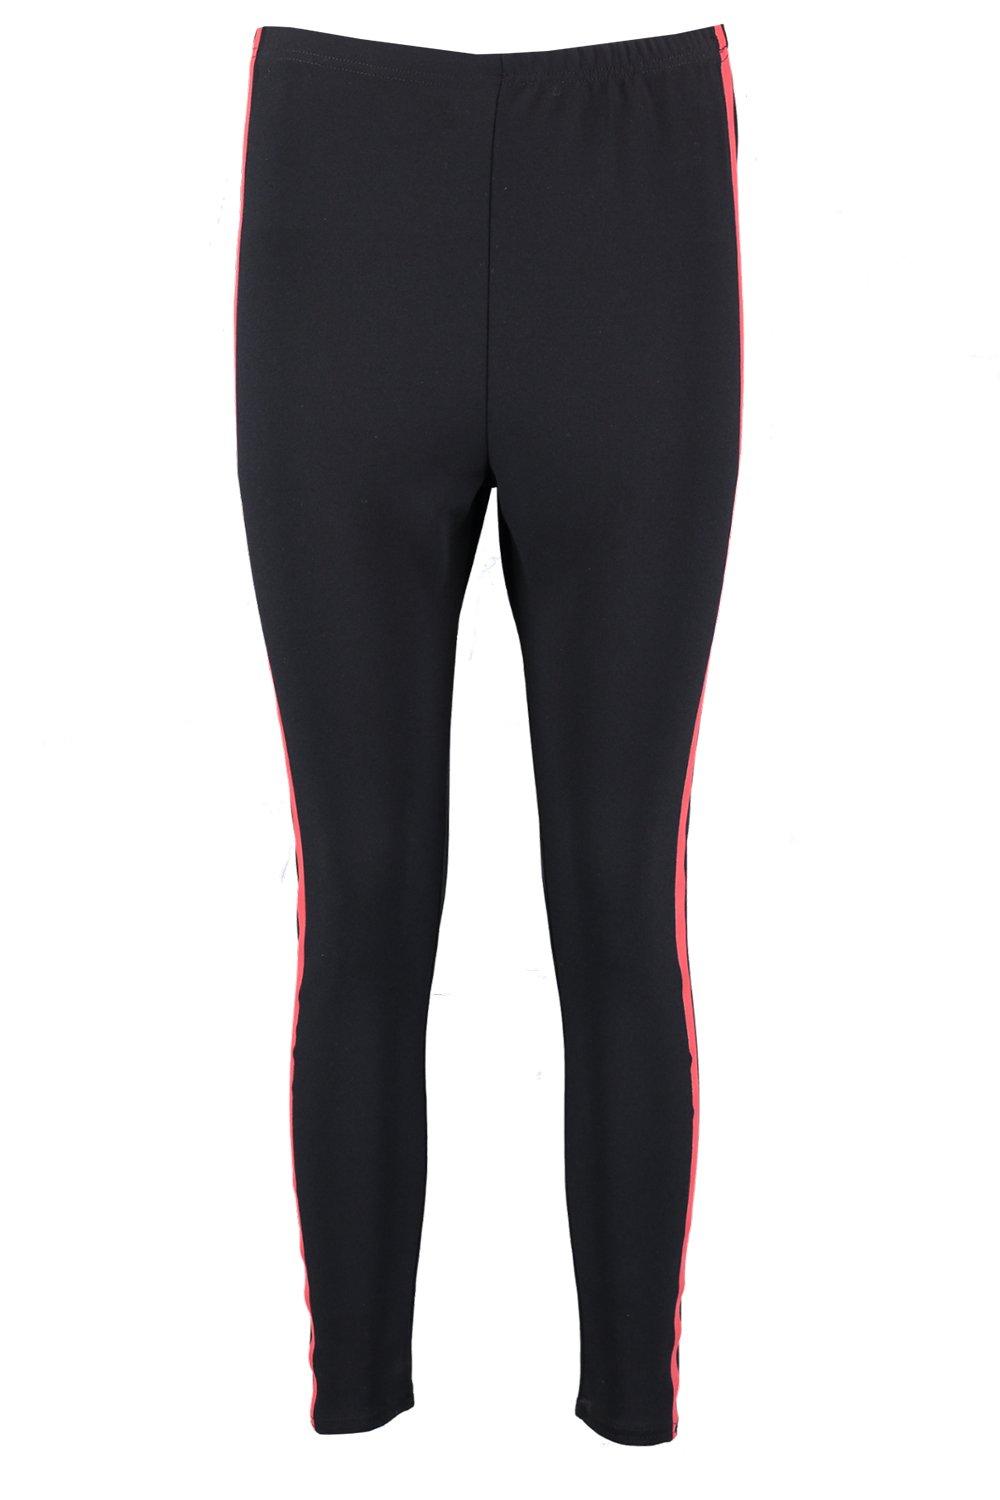 leggings with red side stripe